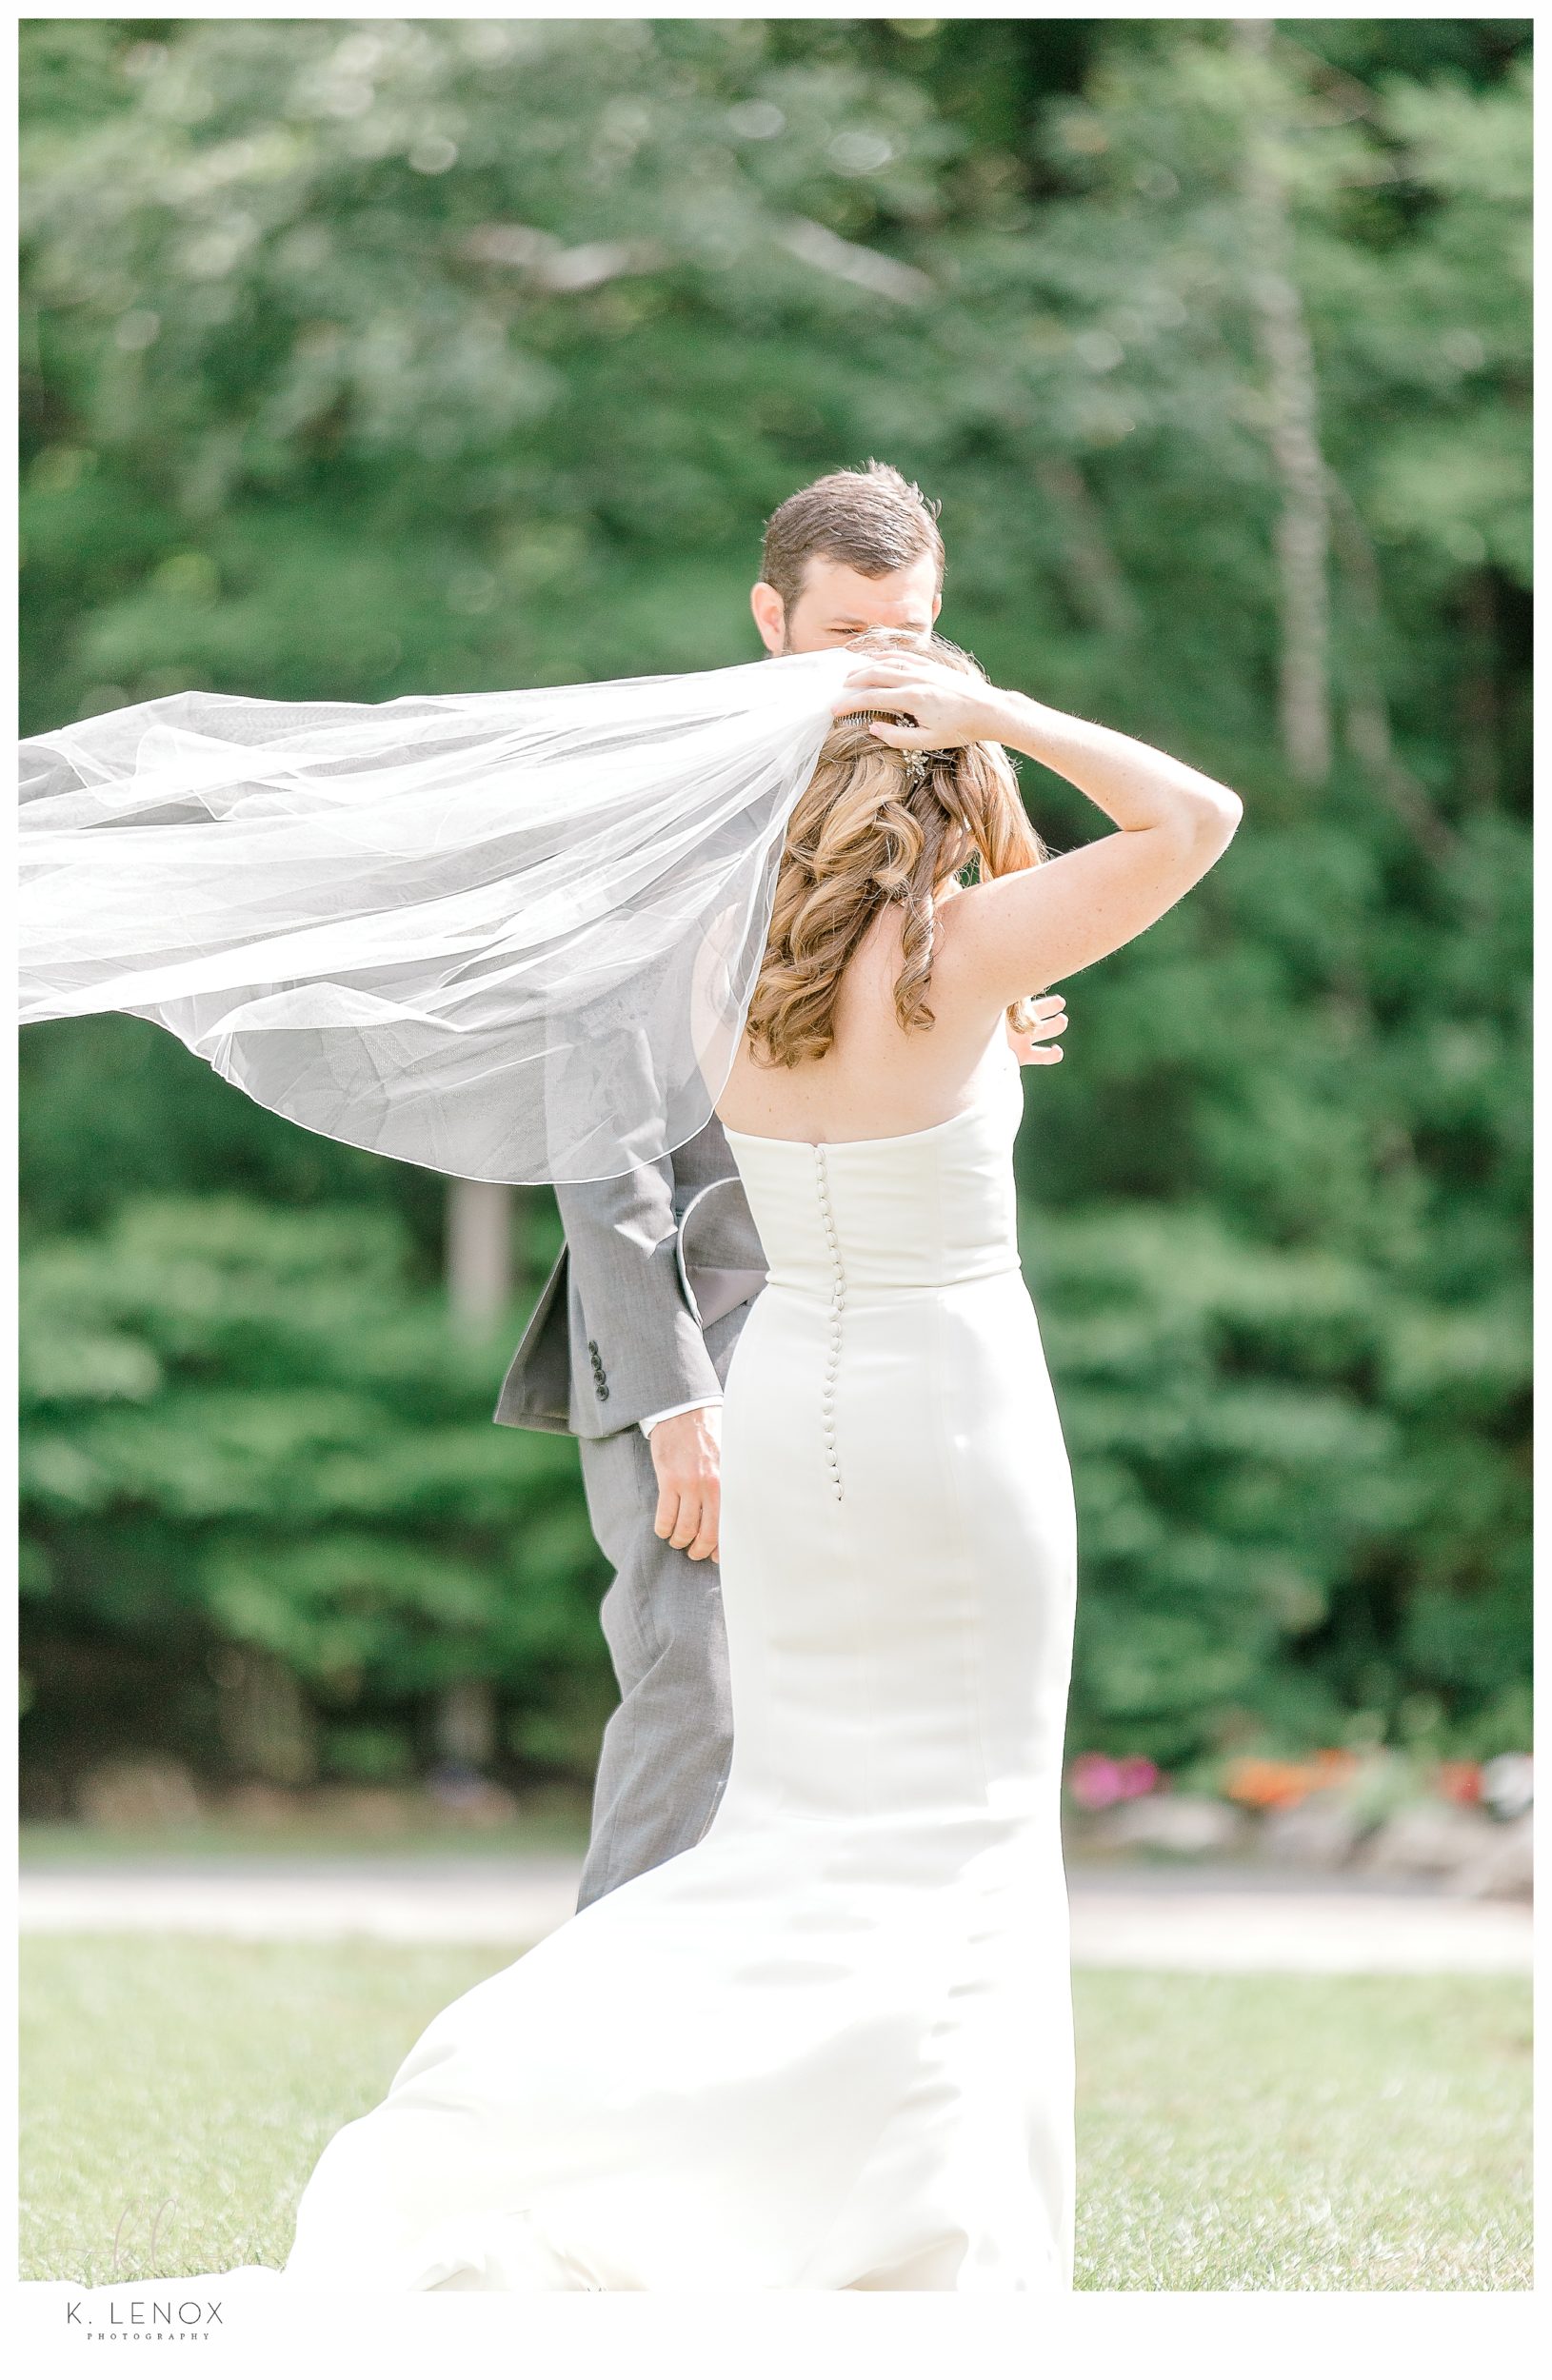 Bride Catches her veil as the wind blows at her wedding. 